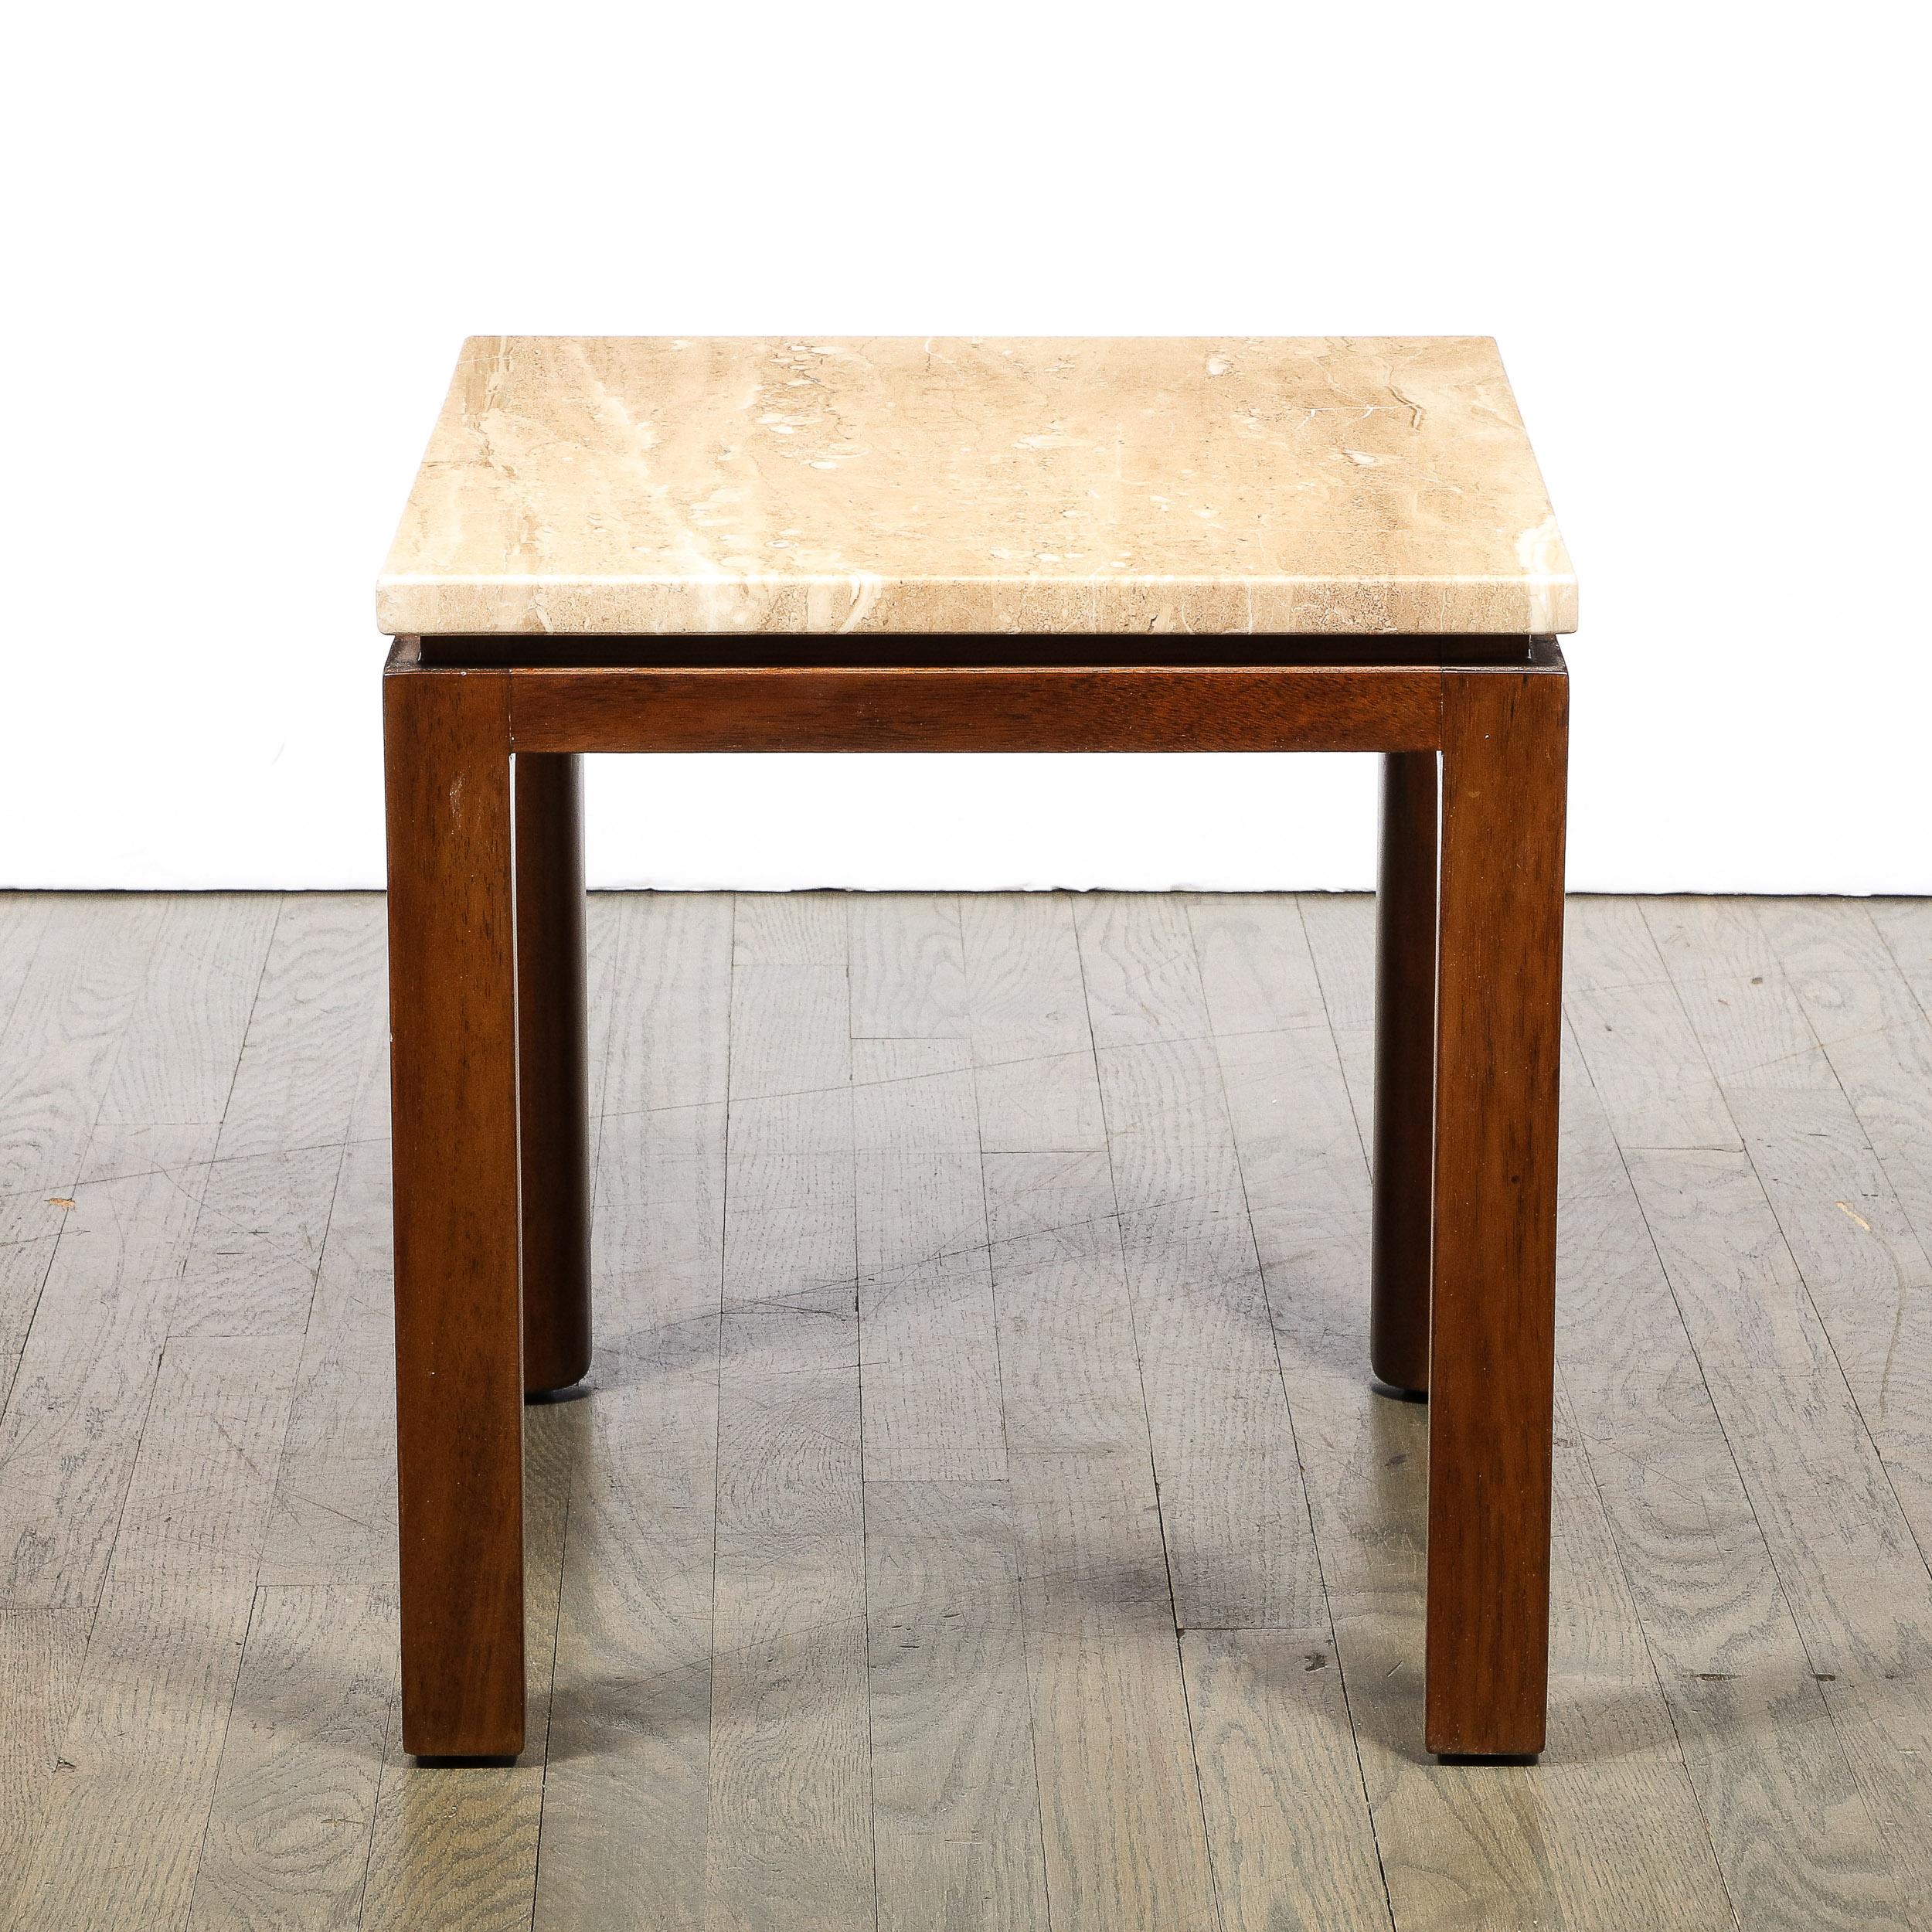 Mid-Century Modernist Side Table in Walnut & Travertine Marble by Harvey Probber For Sale 1